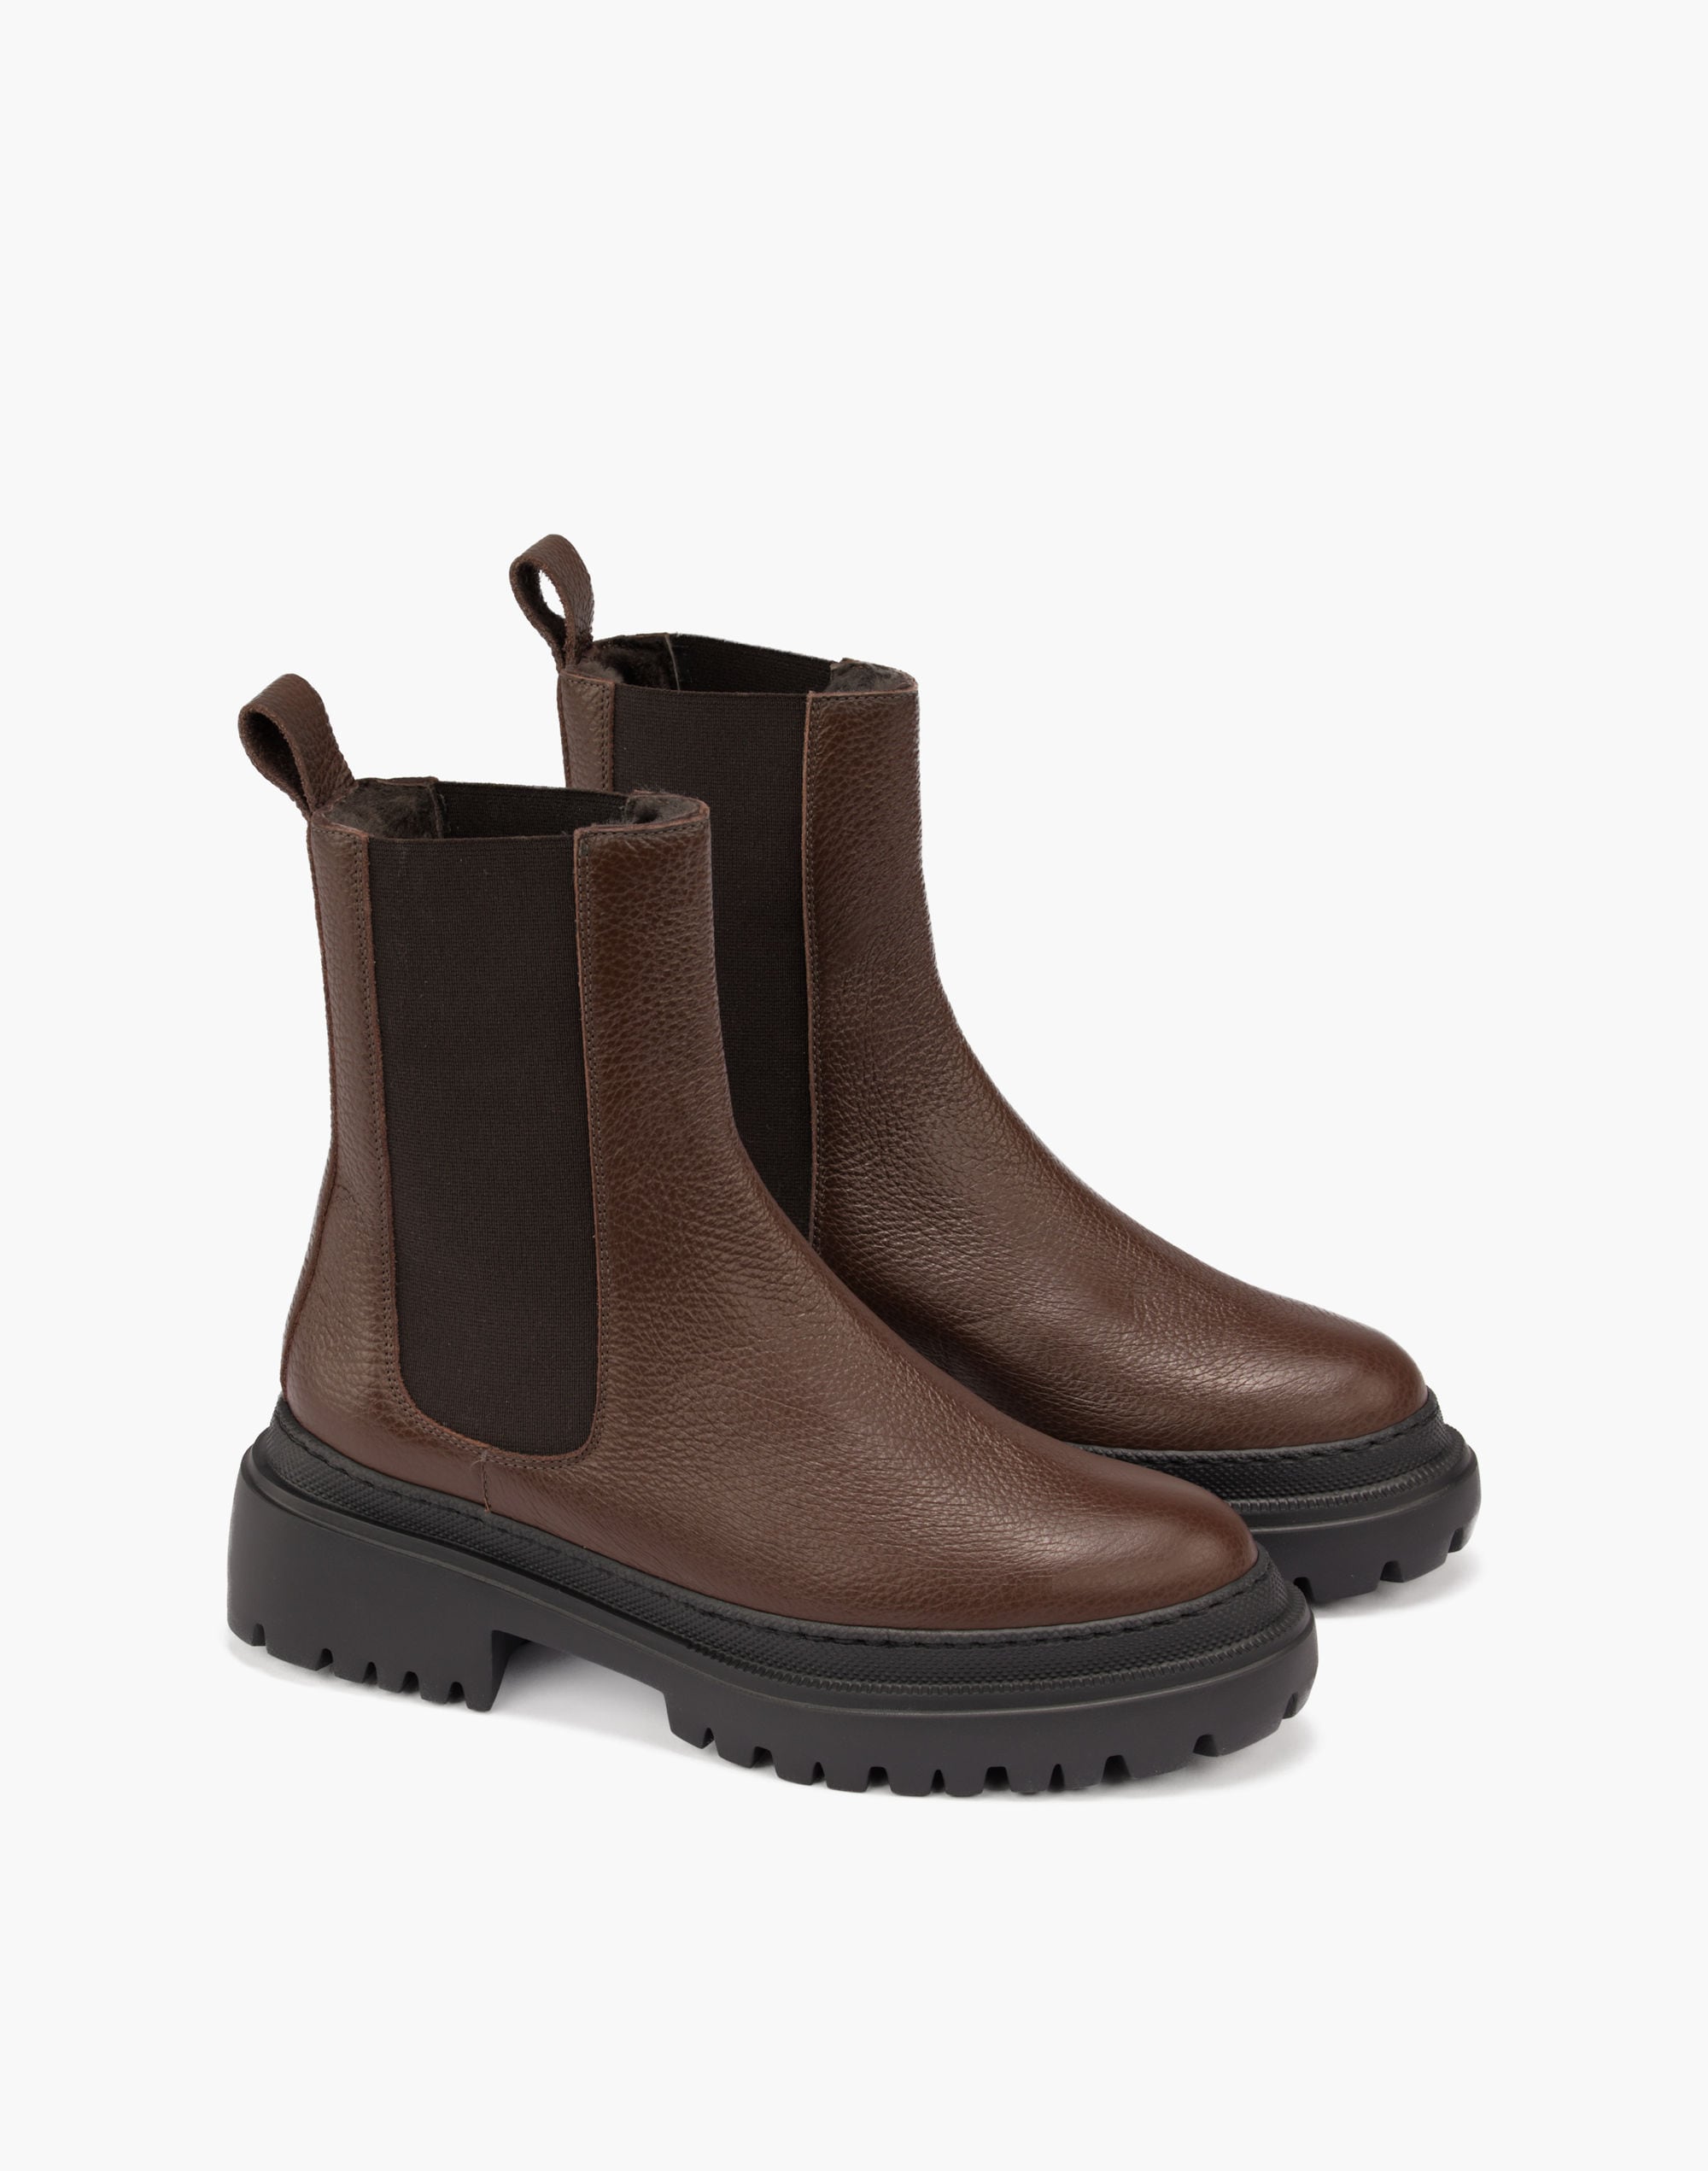 Maguire Shearling-Lined Leather Cortina Chelsea Boots